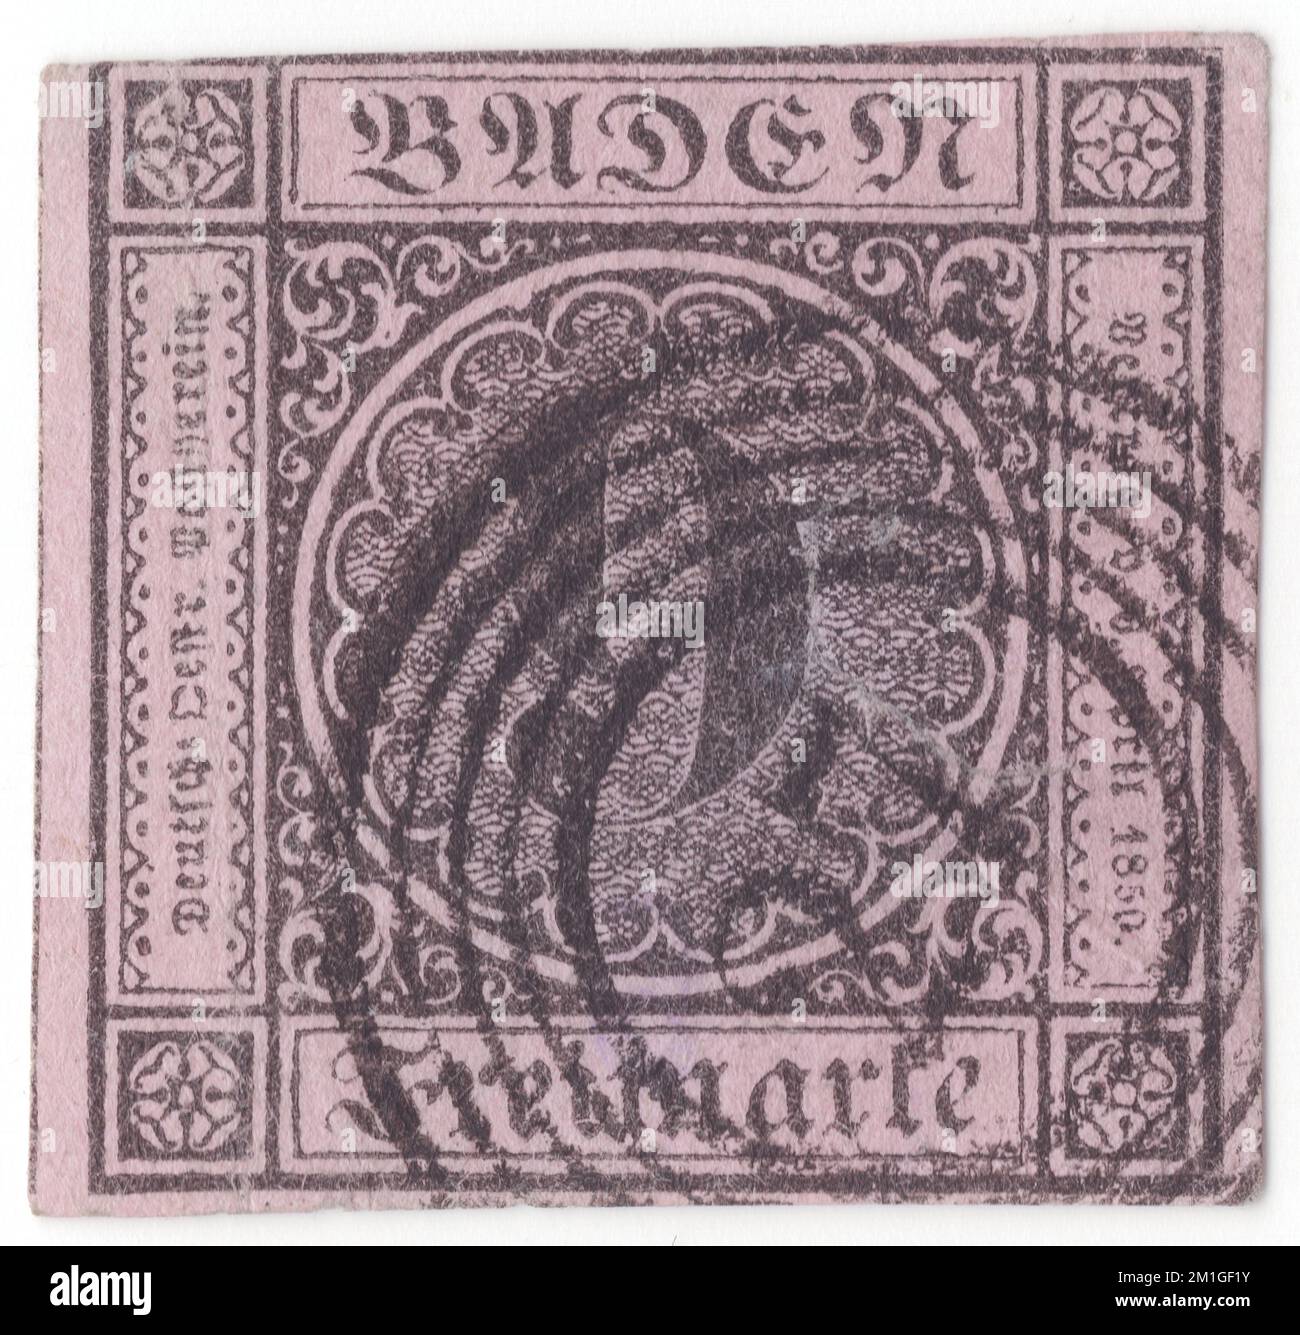 BADEN — 1851: 9 kreuzer black on lilac-rose postage stamp showing numeral and ornament. Baden was one of the German states in the south-west of Germany. Grand Duchy, capital — Karlsruhe (principal city). Baden was a member of the German Confederation. In 1870 it became part of the German Empire. 60 Kreuzer = 1 Gulden Stock Photo